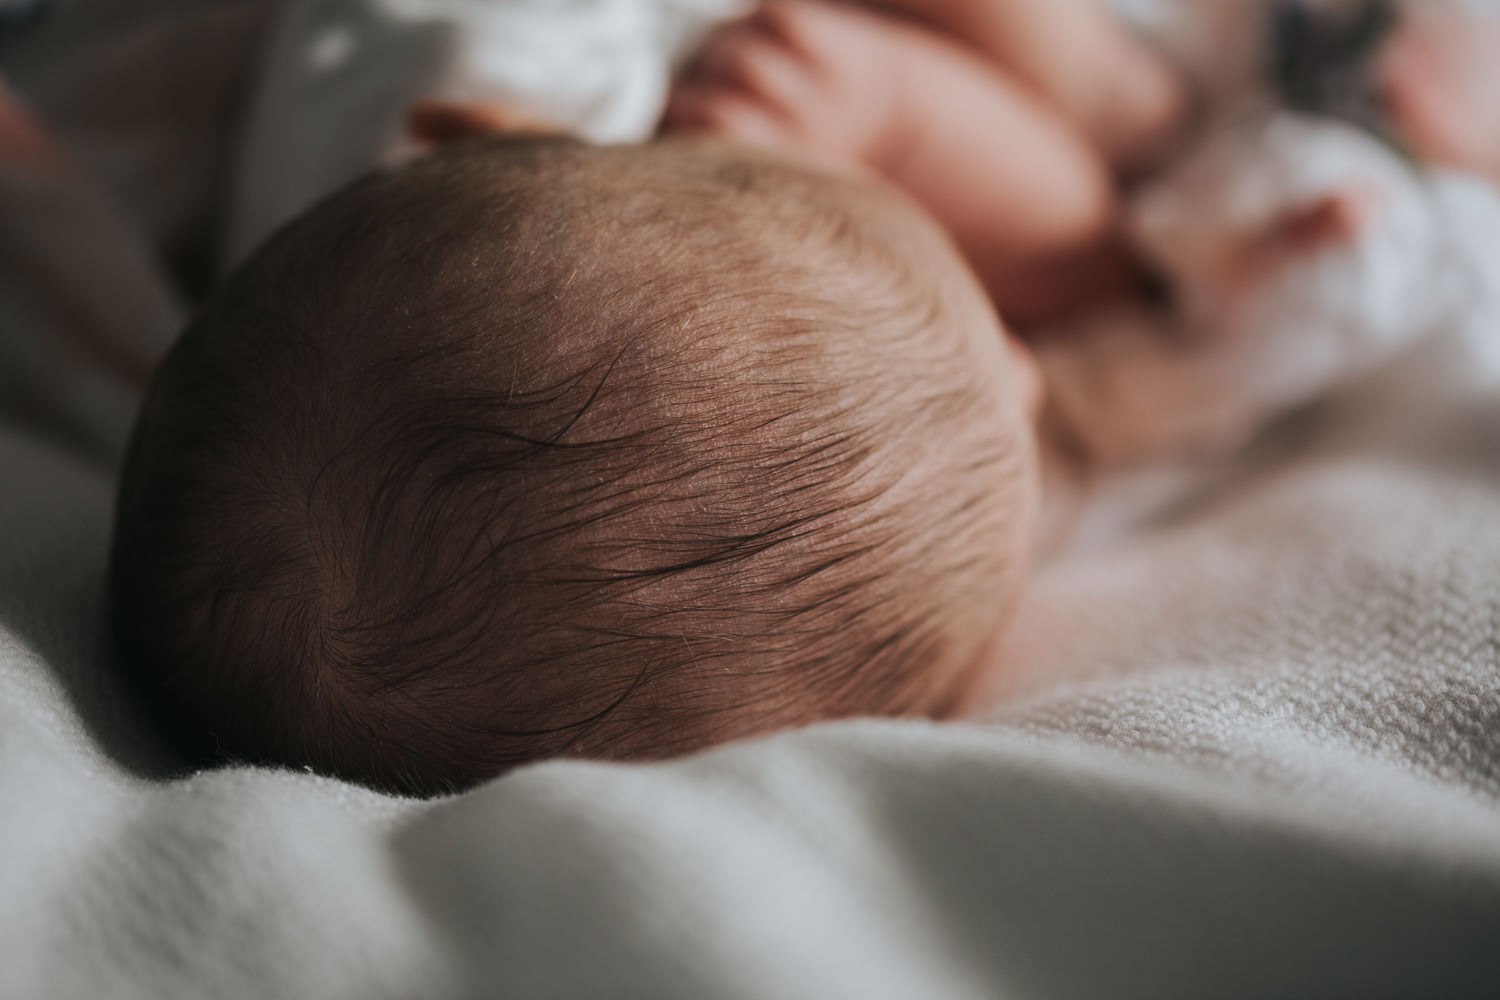 6 week old baby girl lying on bed asleep, close up of hair - Markham lifestyle photography